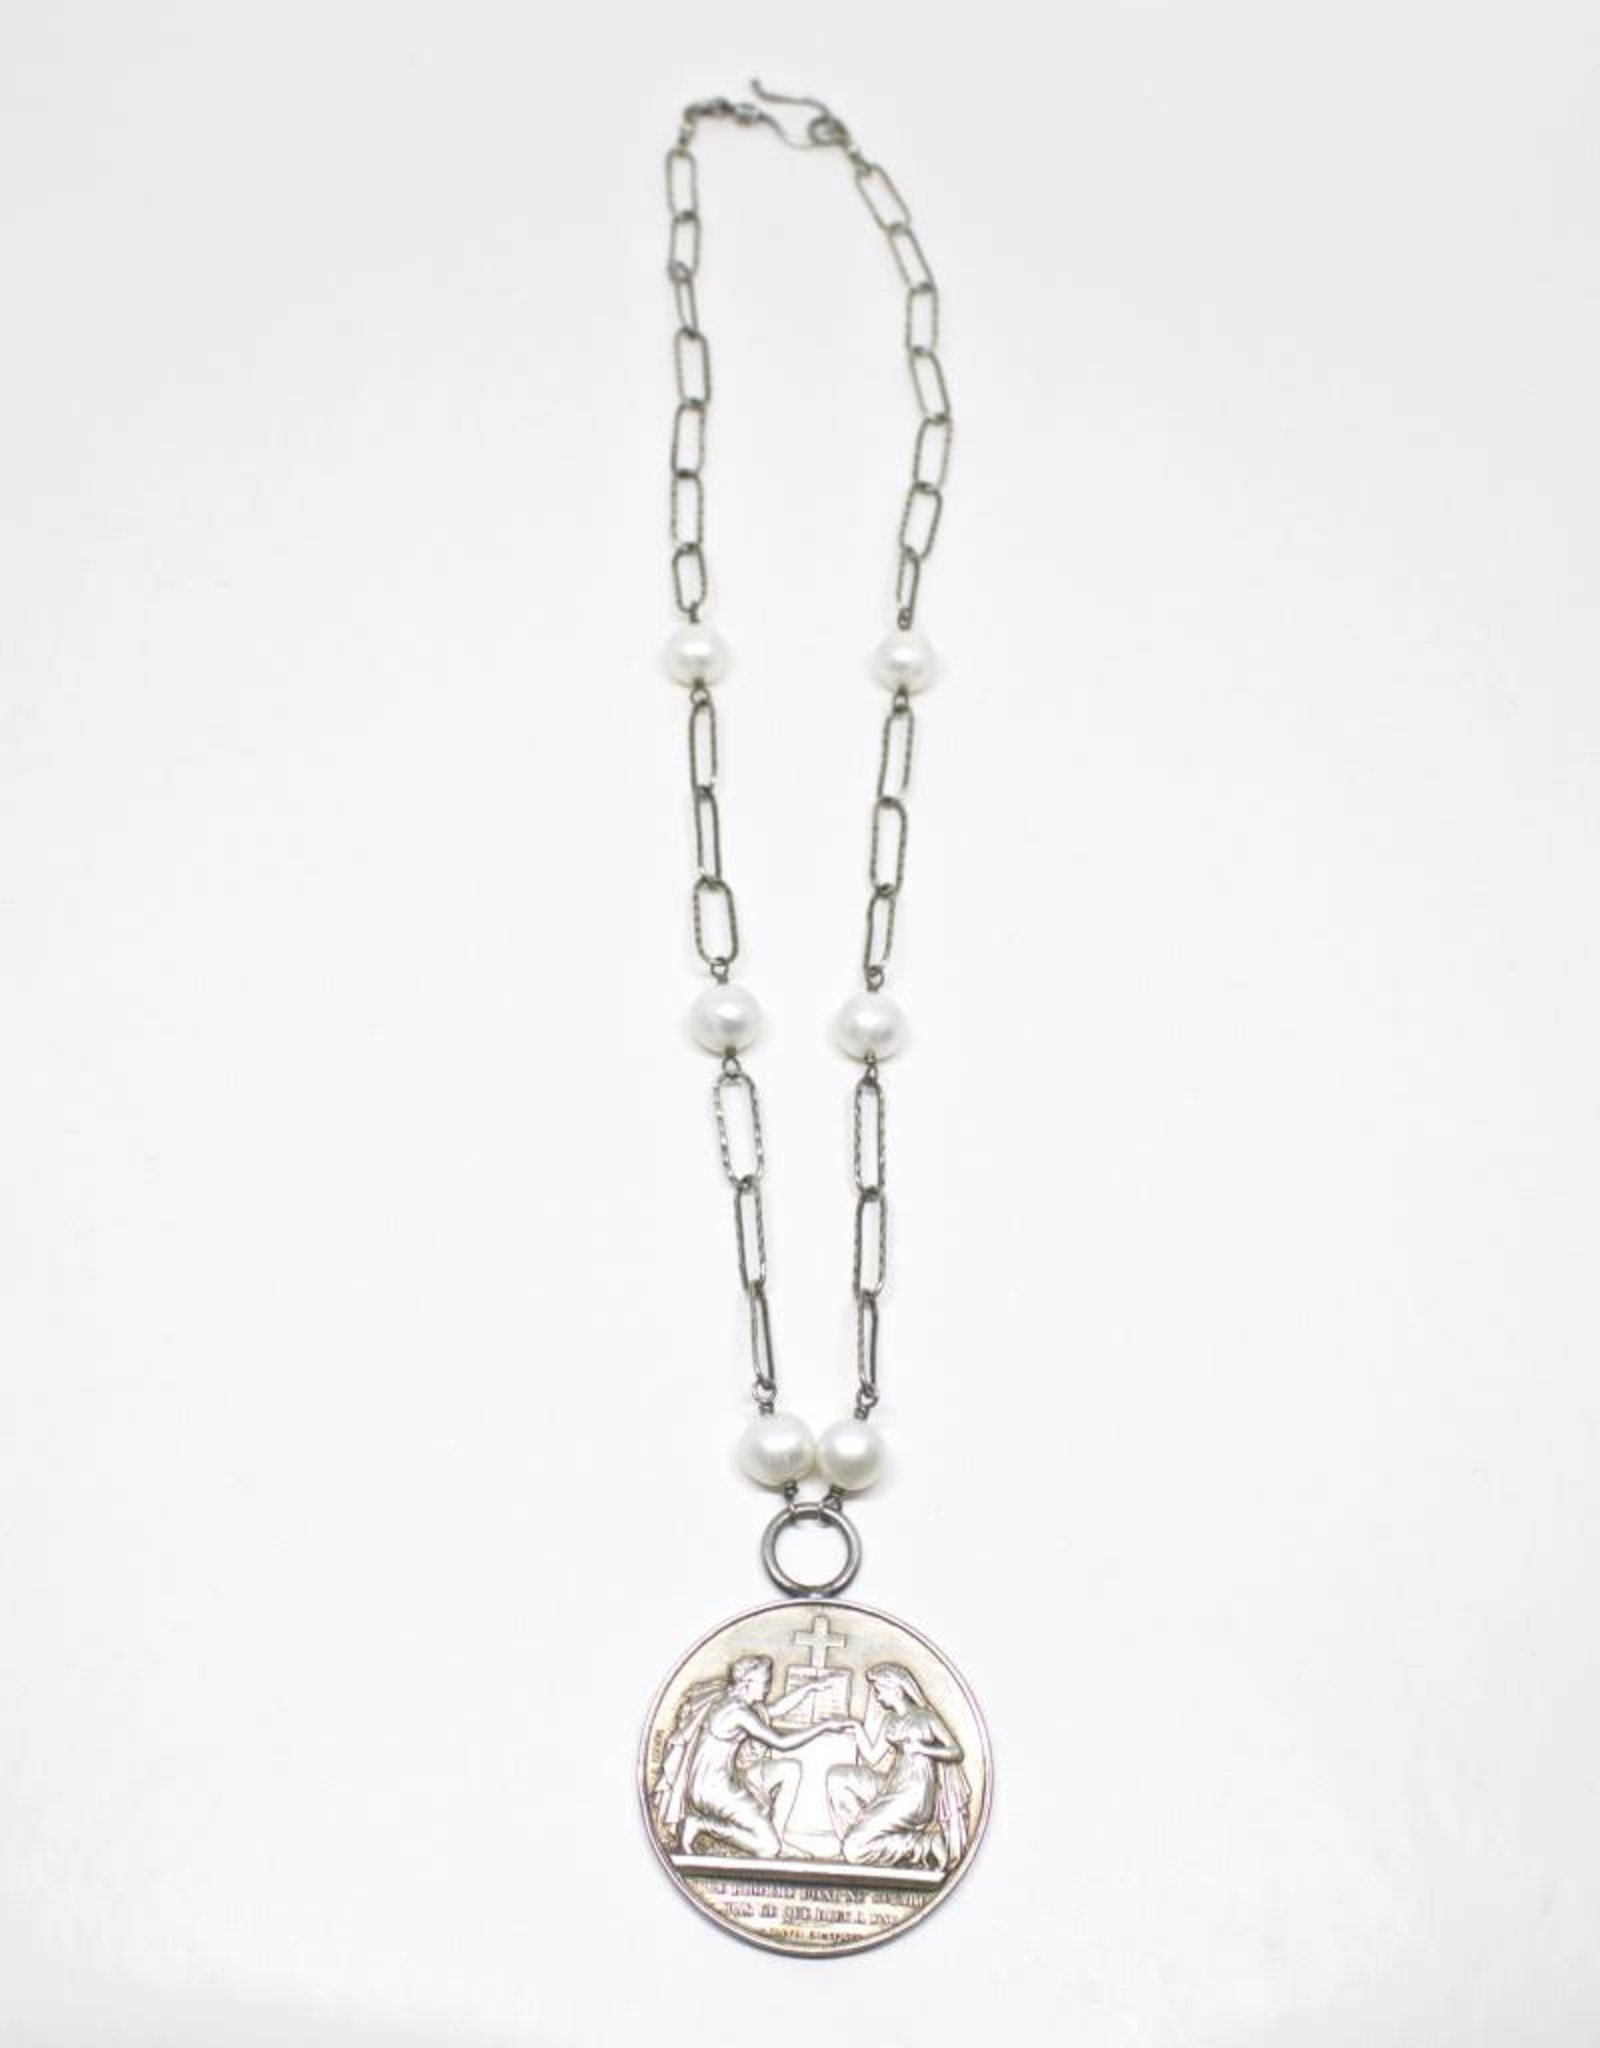 mary james antique marriage medal necklace